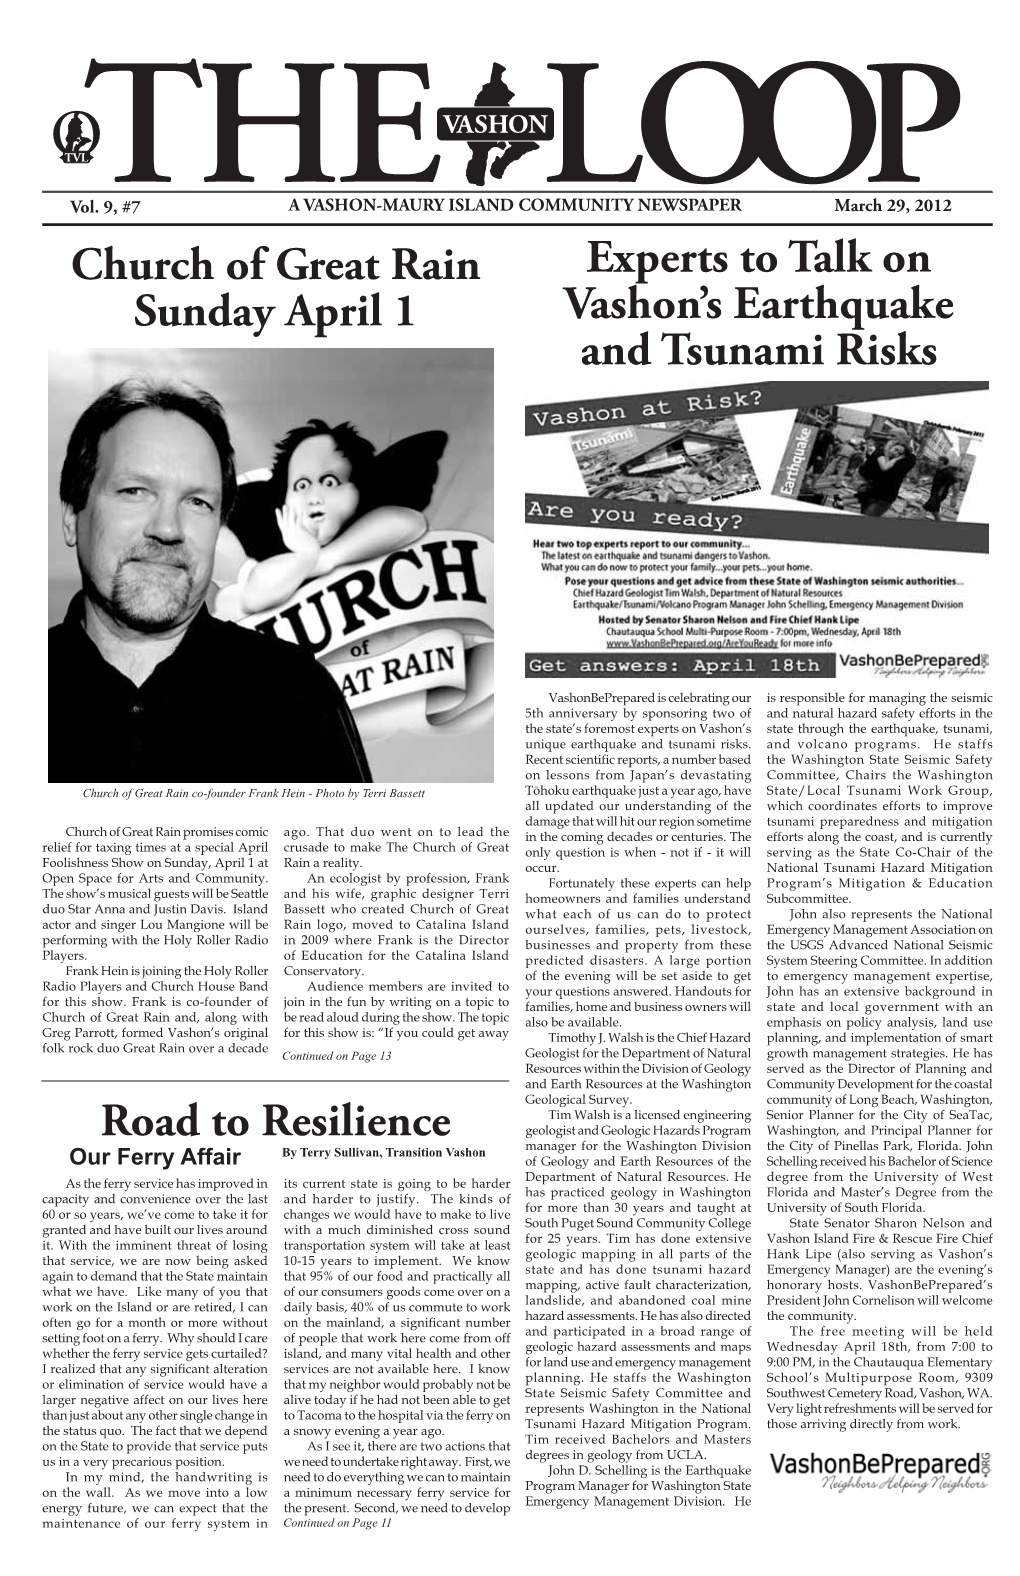 Road to Resilience Experts to Talk on Vashon's Earthquake and Tsunami